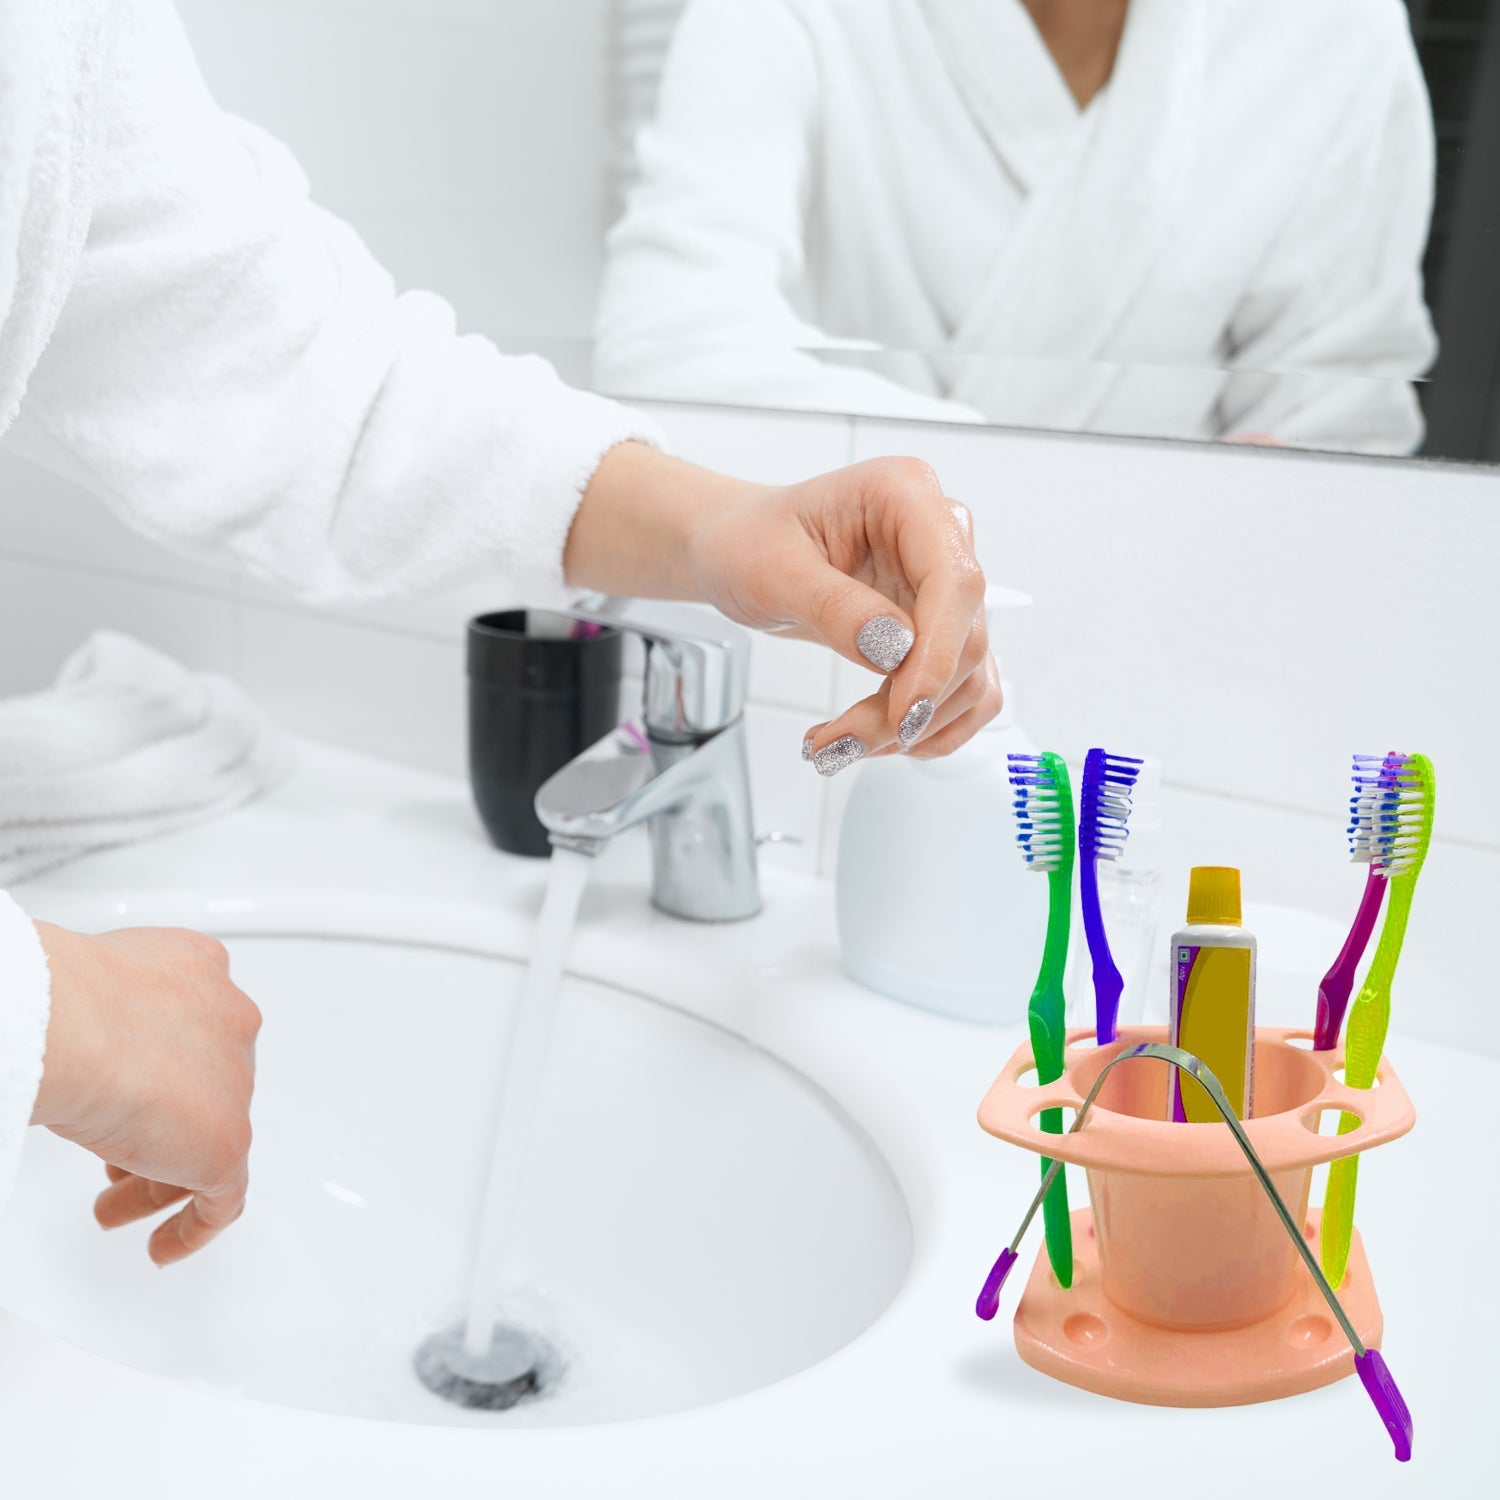 3689 Toothbrush Holder widely used in all types of bathroom places for holding and storing toothbrushes and toothpastes of all types of family members etc - DeoDap